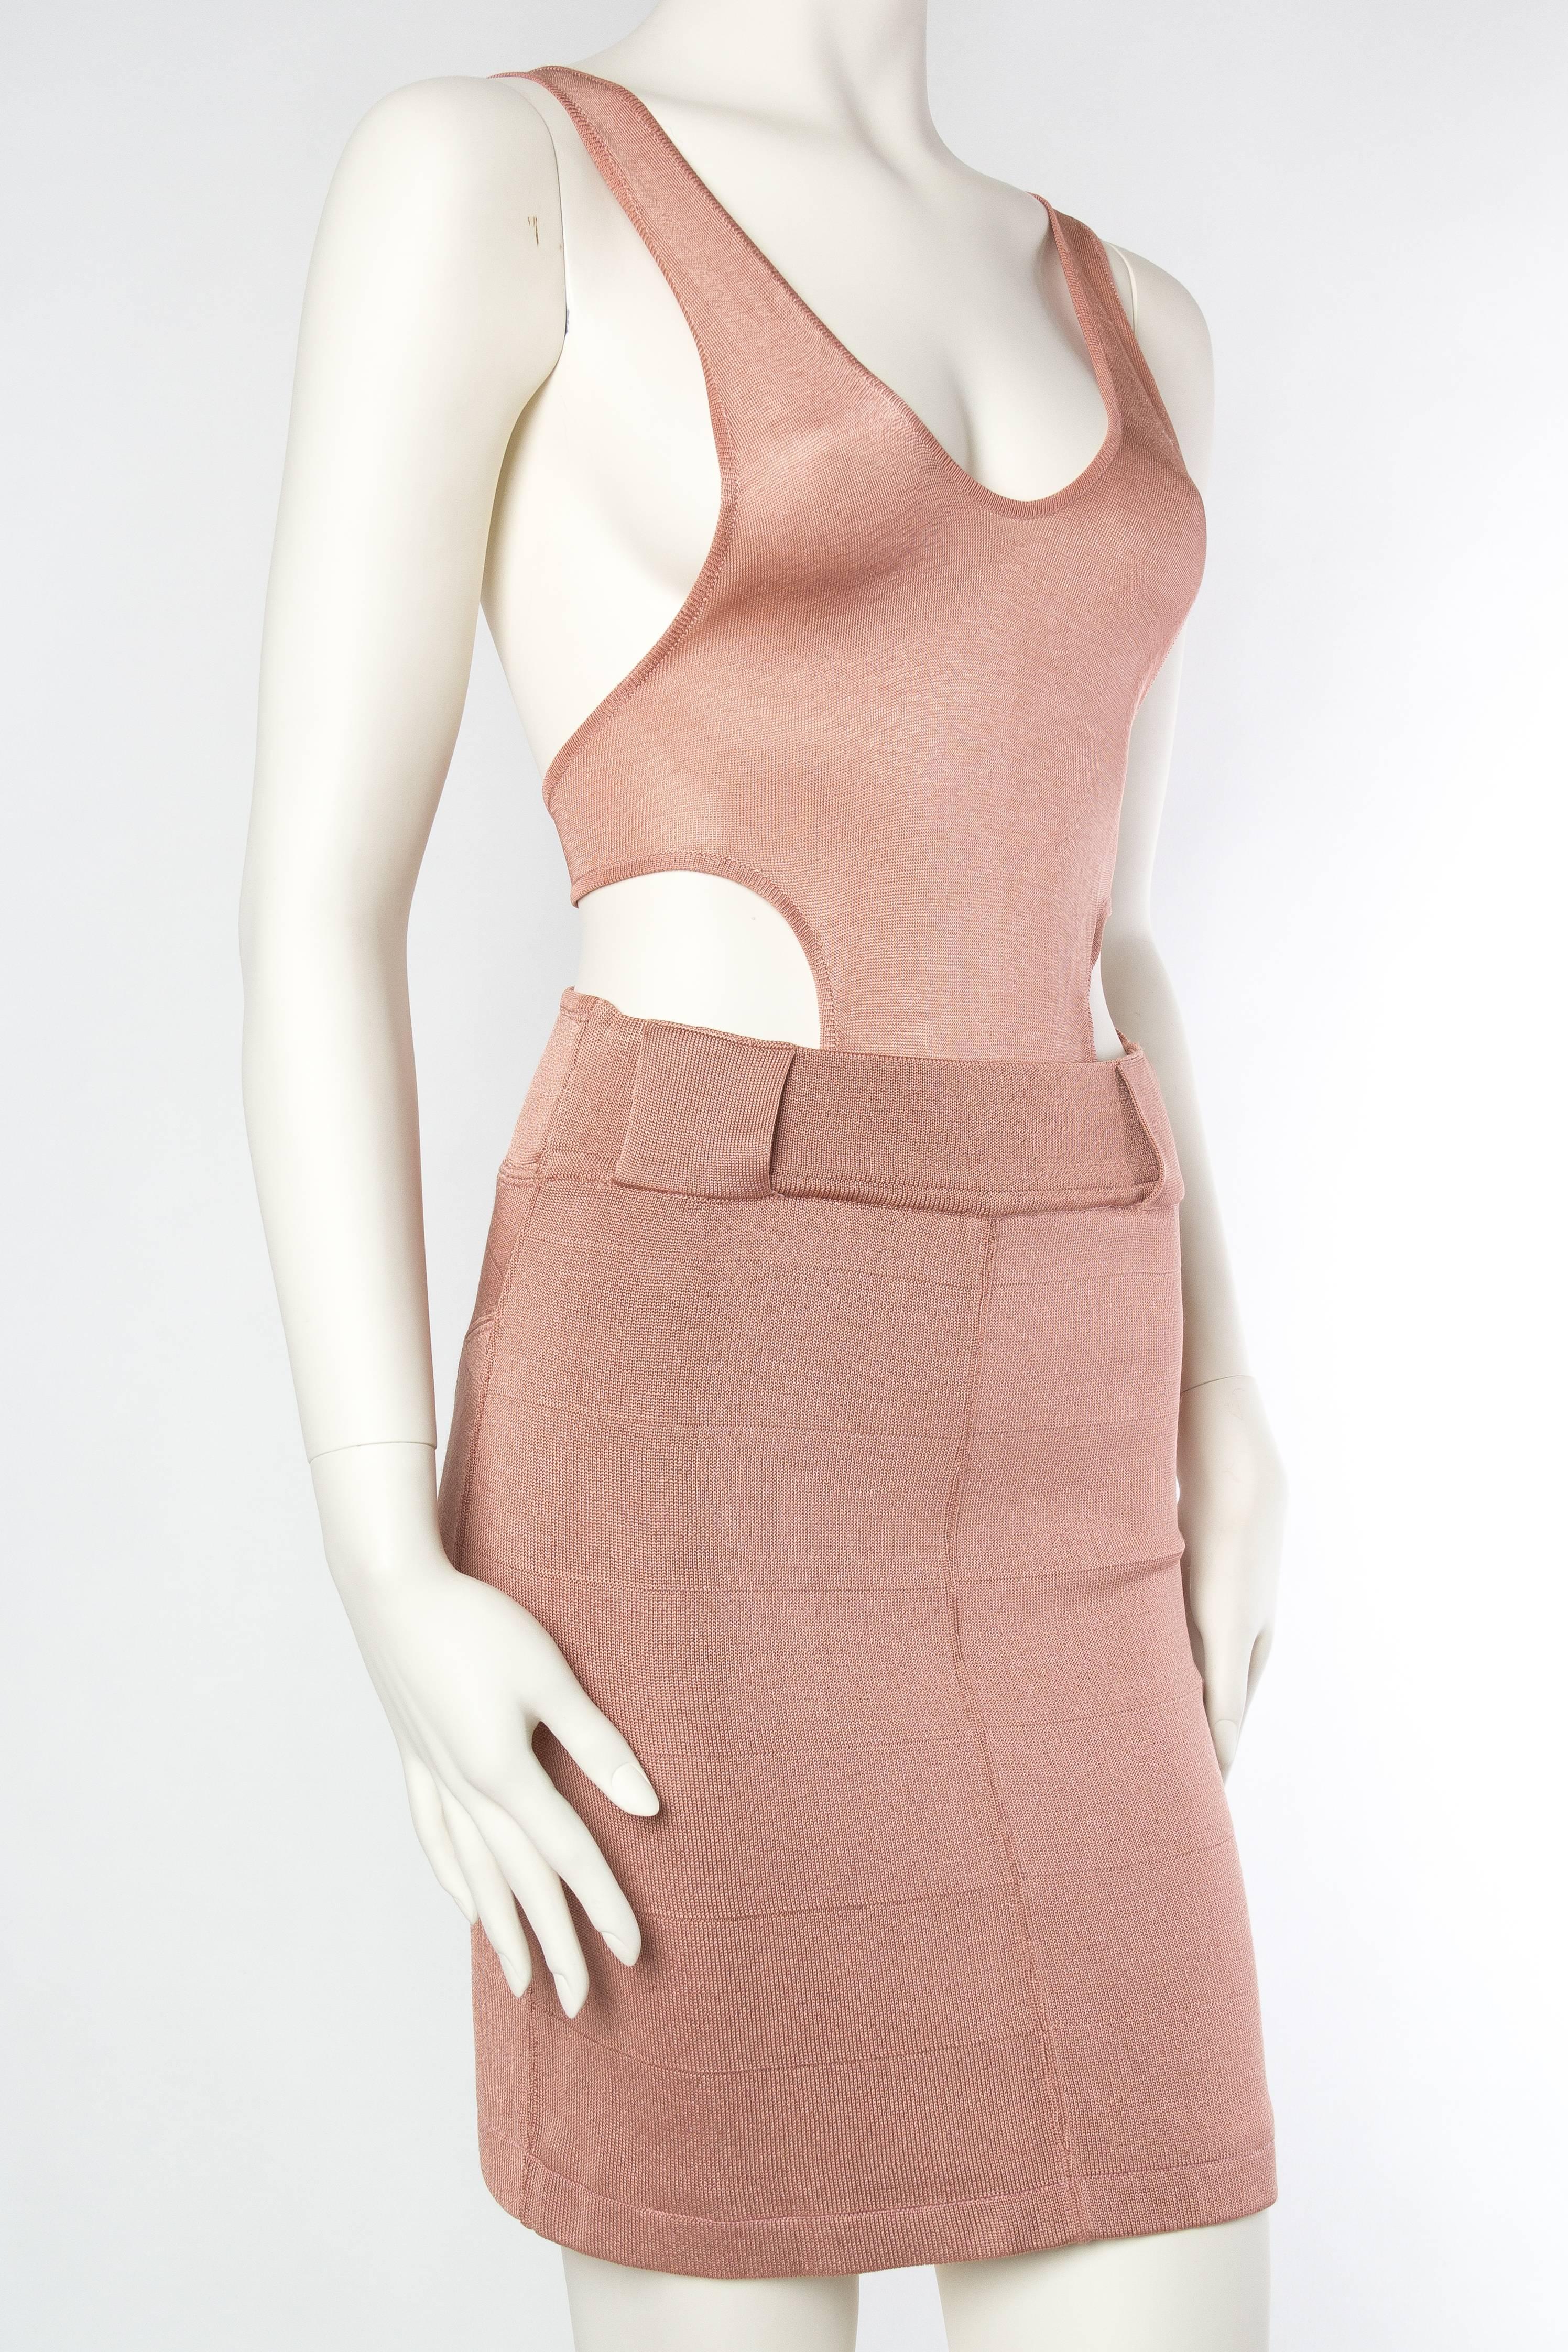 Beige 1990 ALAIA Blush Pink Rayon Jersey Bodycon Cocktail Dress With Cut Out Racer Ba For Sale